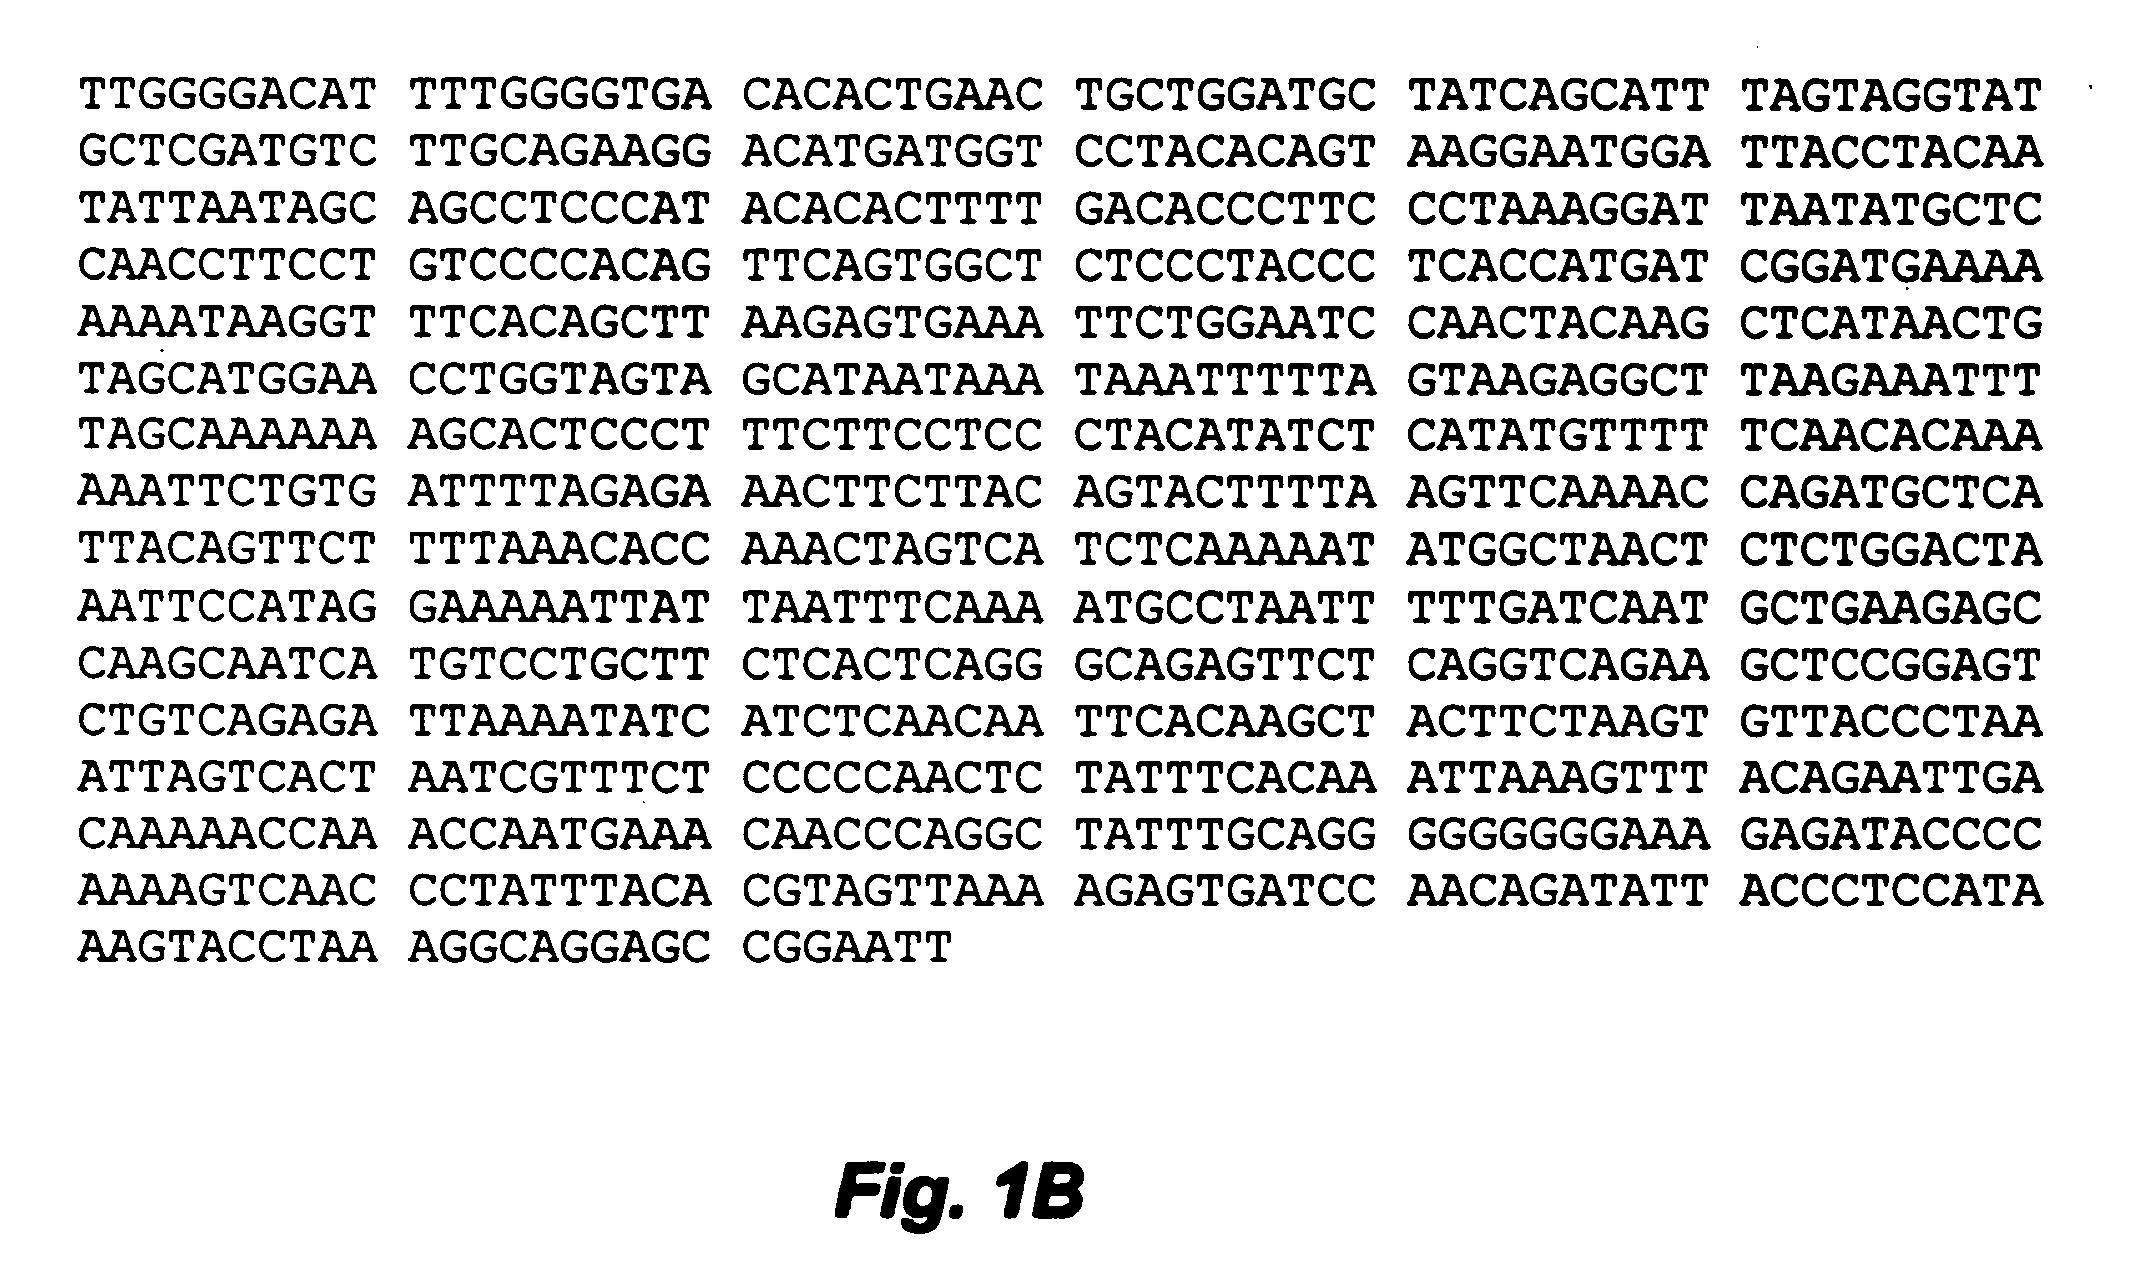 Methods and use of motoneuronotrophic factor